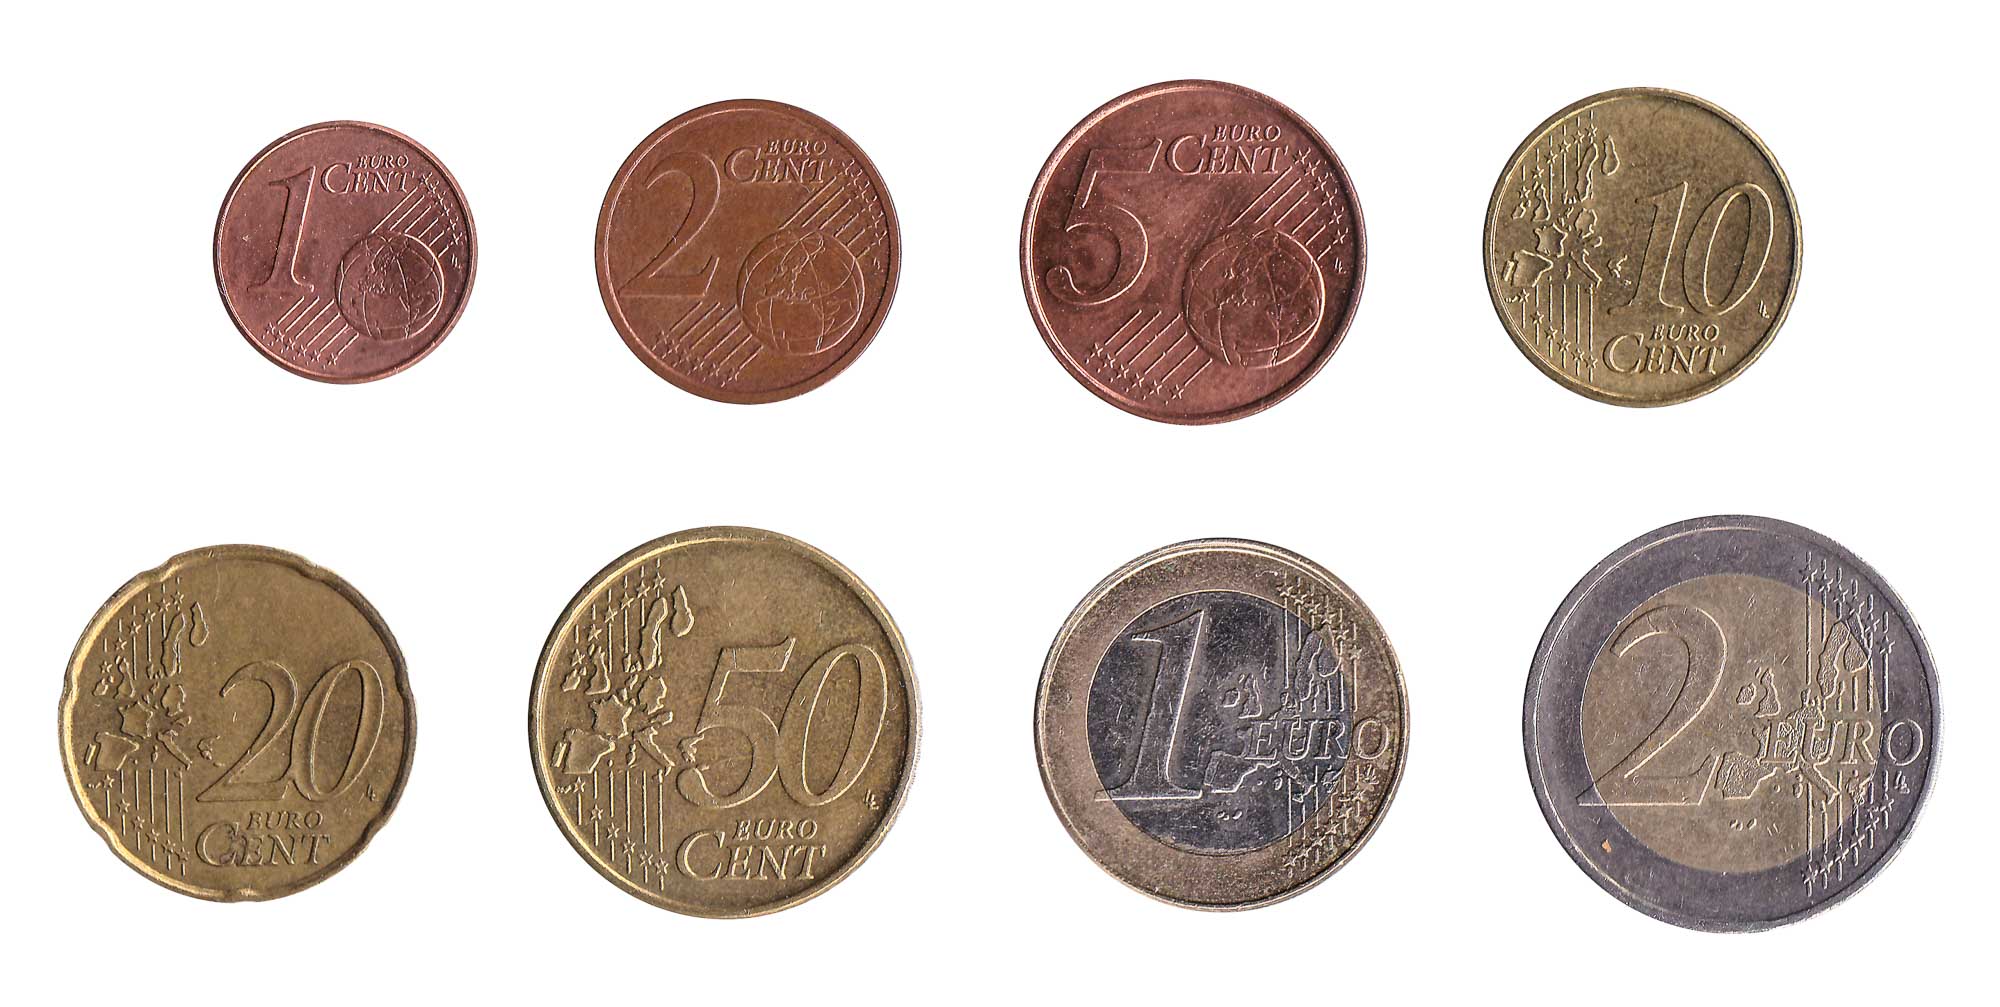 Leftover Currency - Euro coins worth more than ever